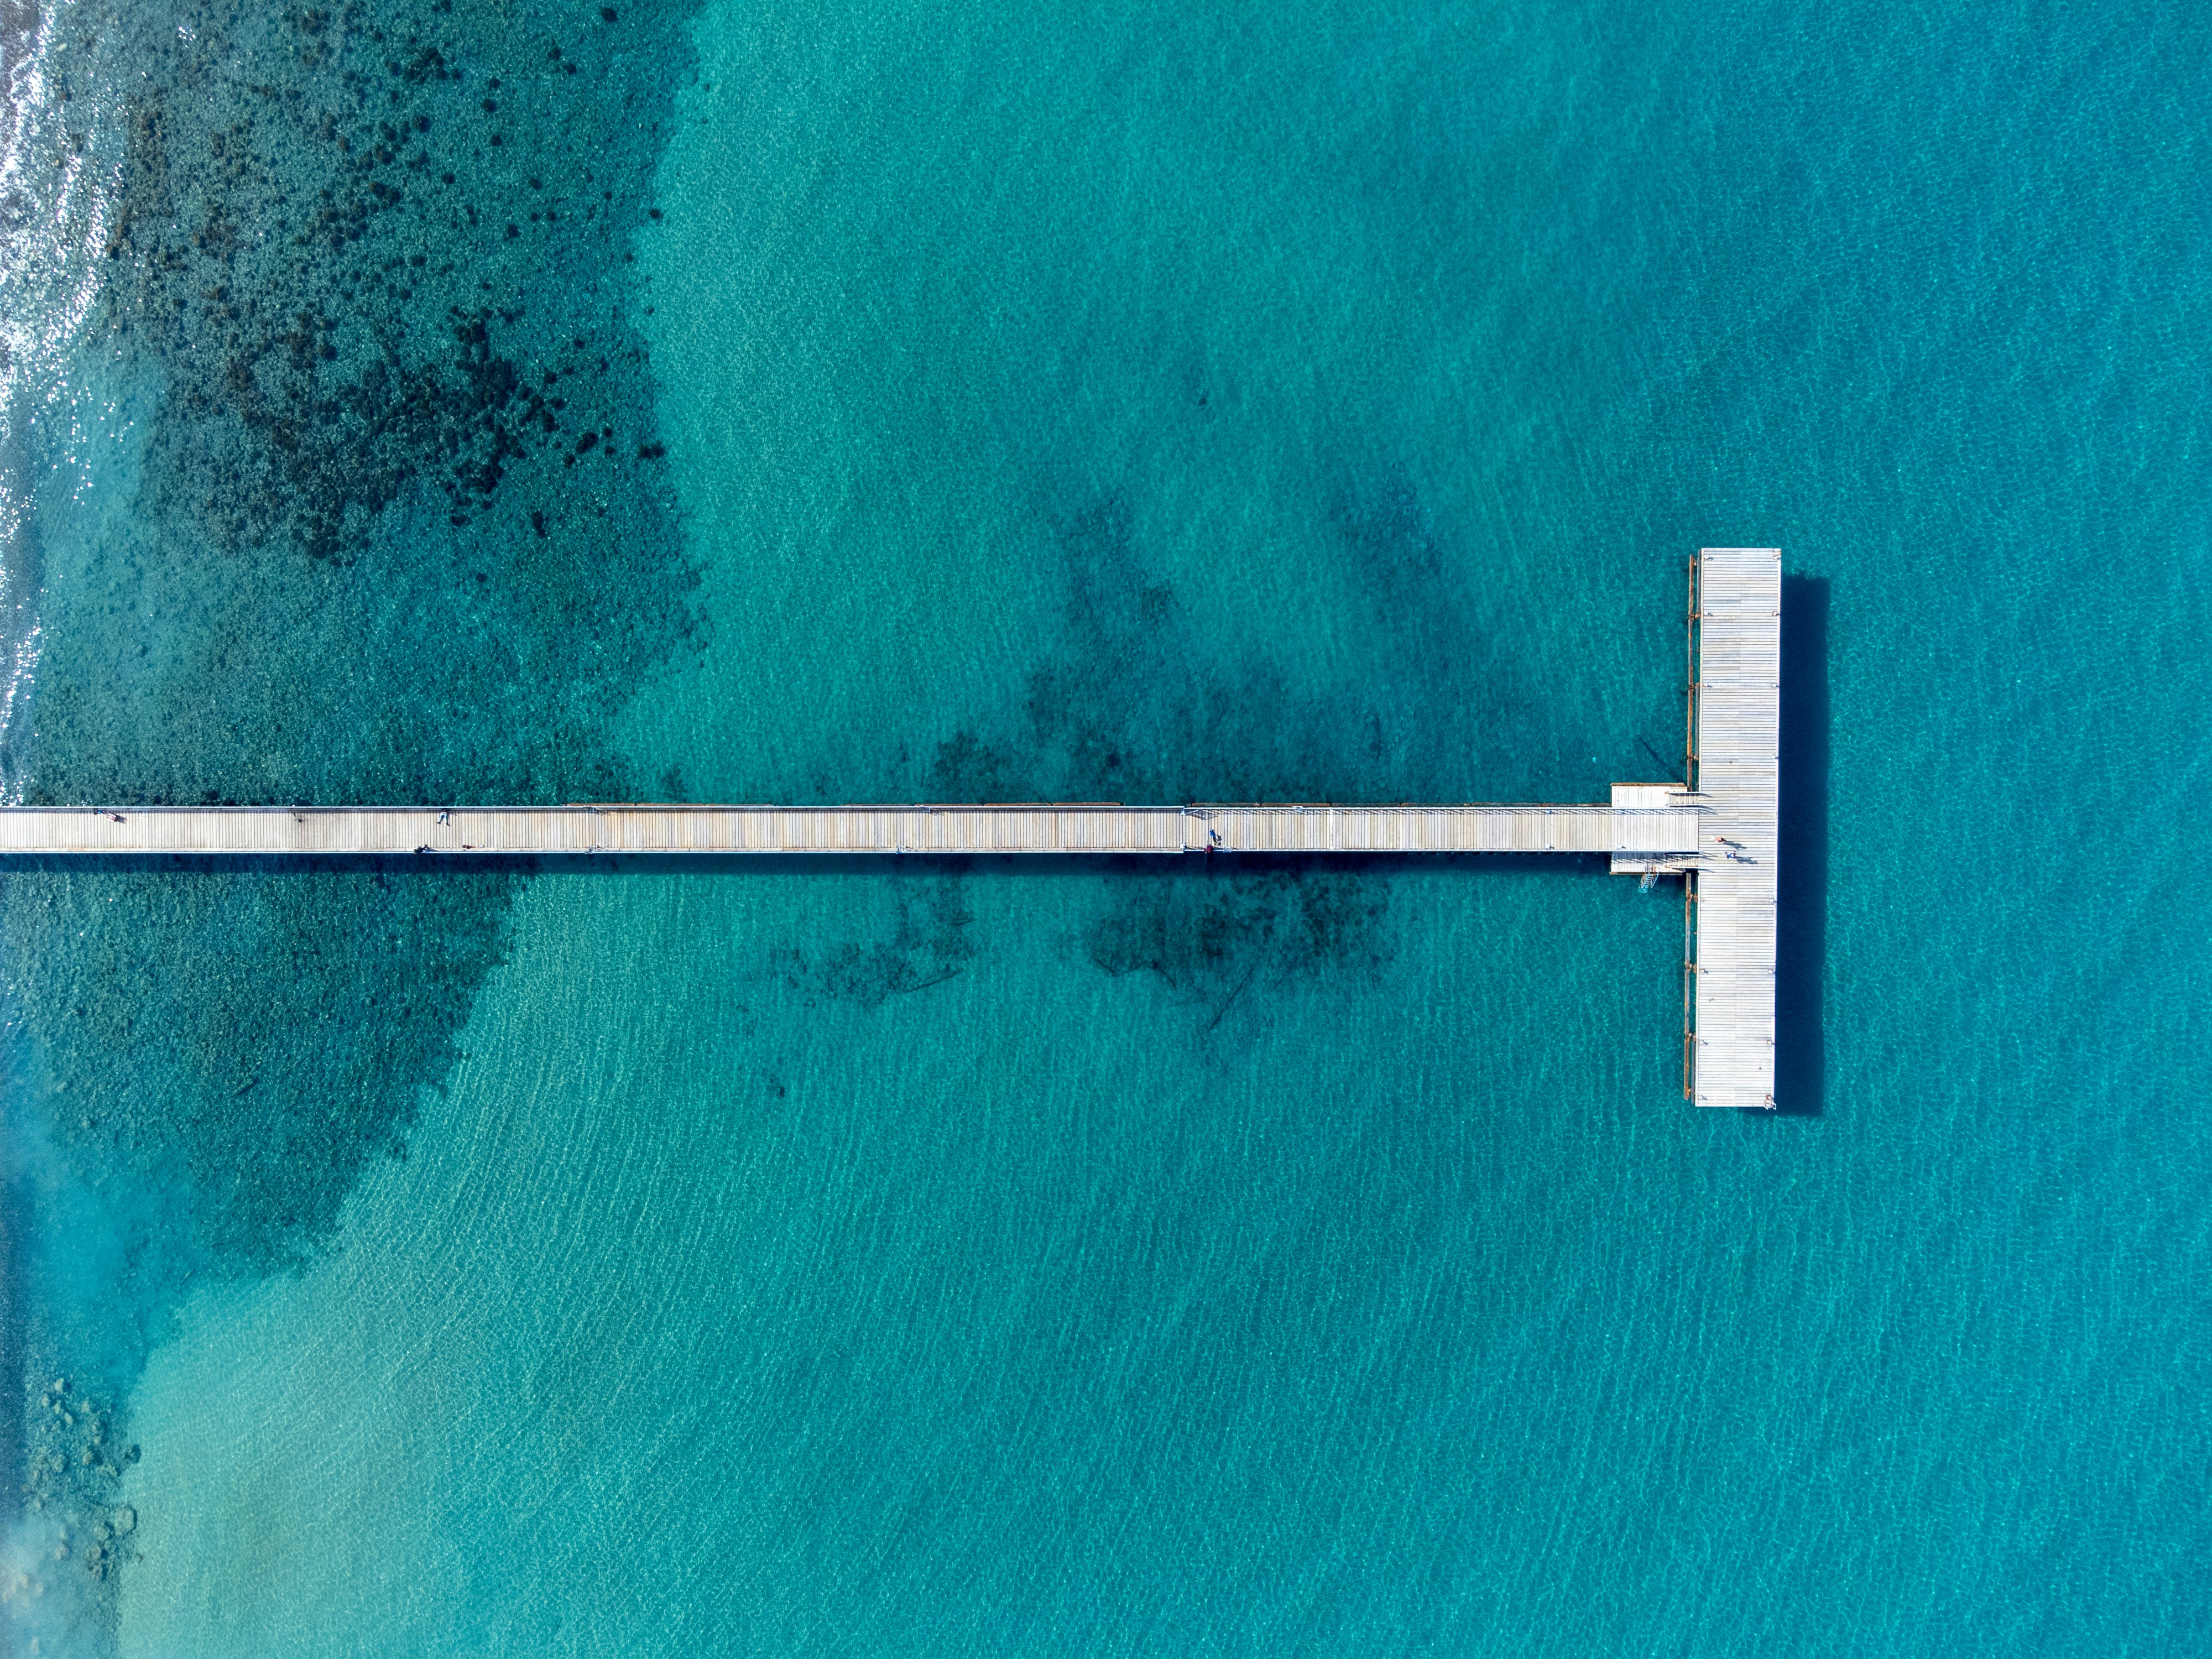 Drone view of Limni Pier in Cyprus.